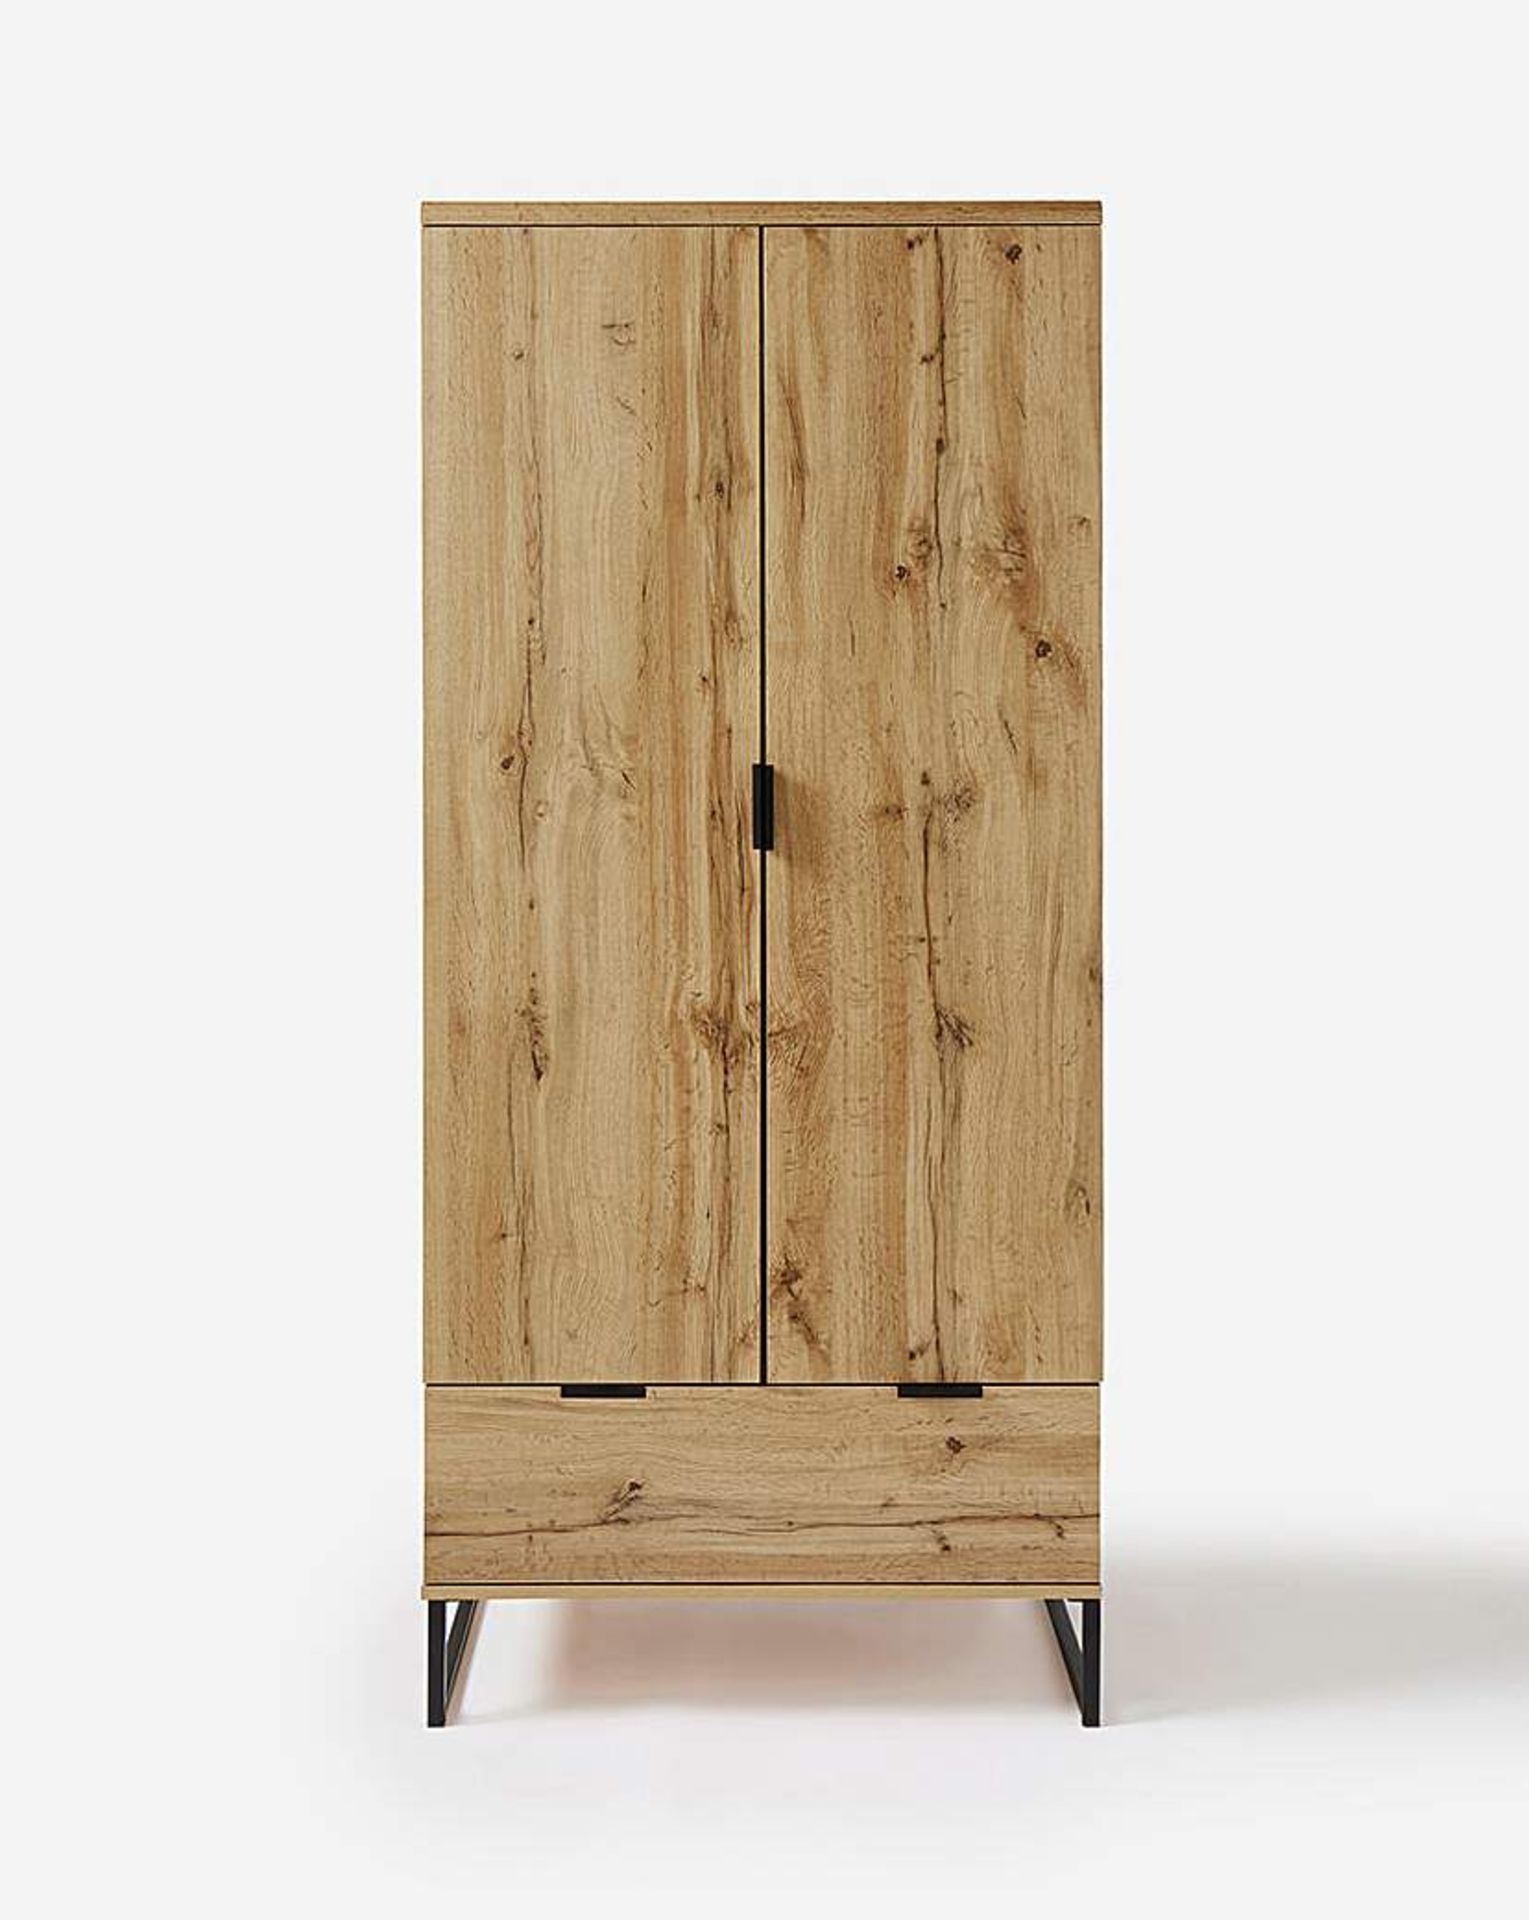 BRAND NEW Oak Shoreditch Wardrobe. RRP £299 EACH. The Shoreditch Range has a contemporary and